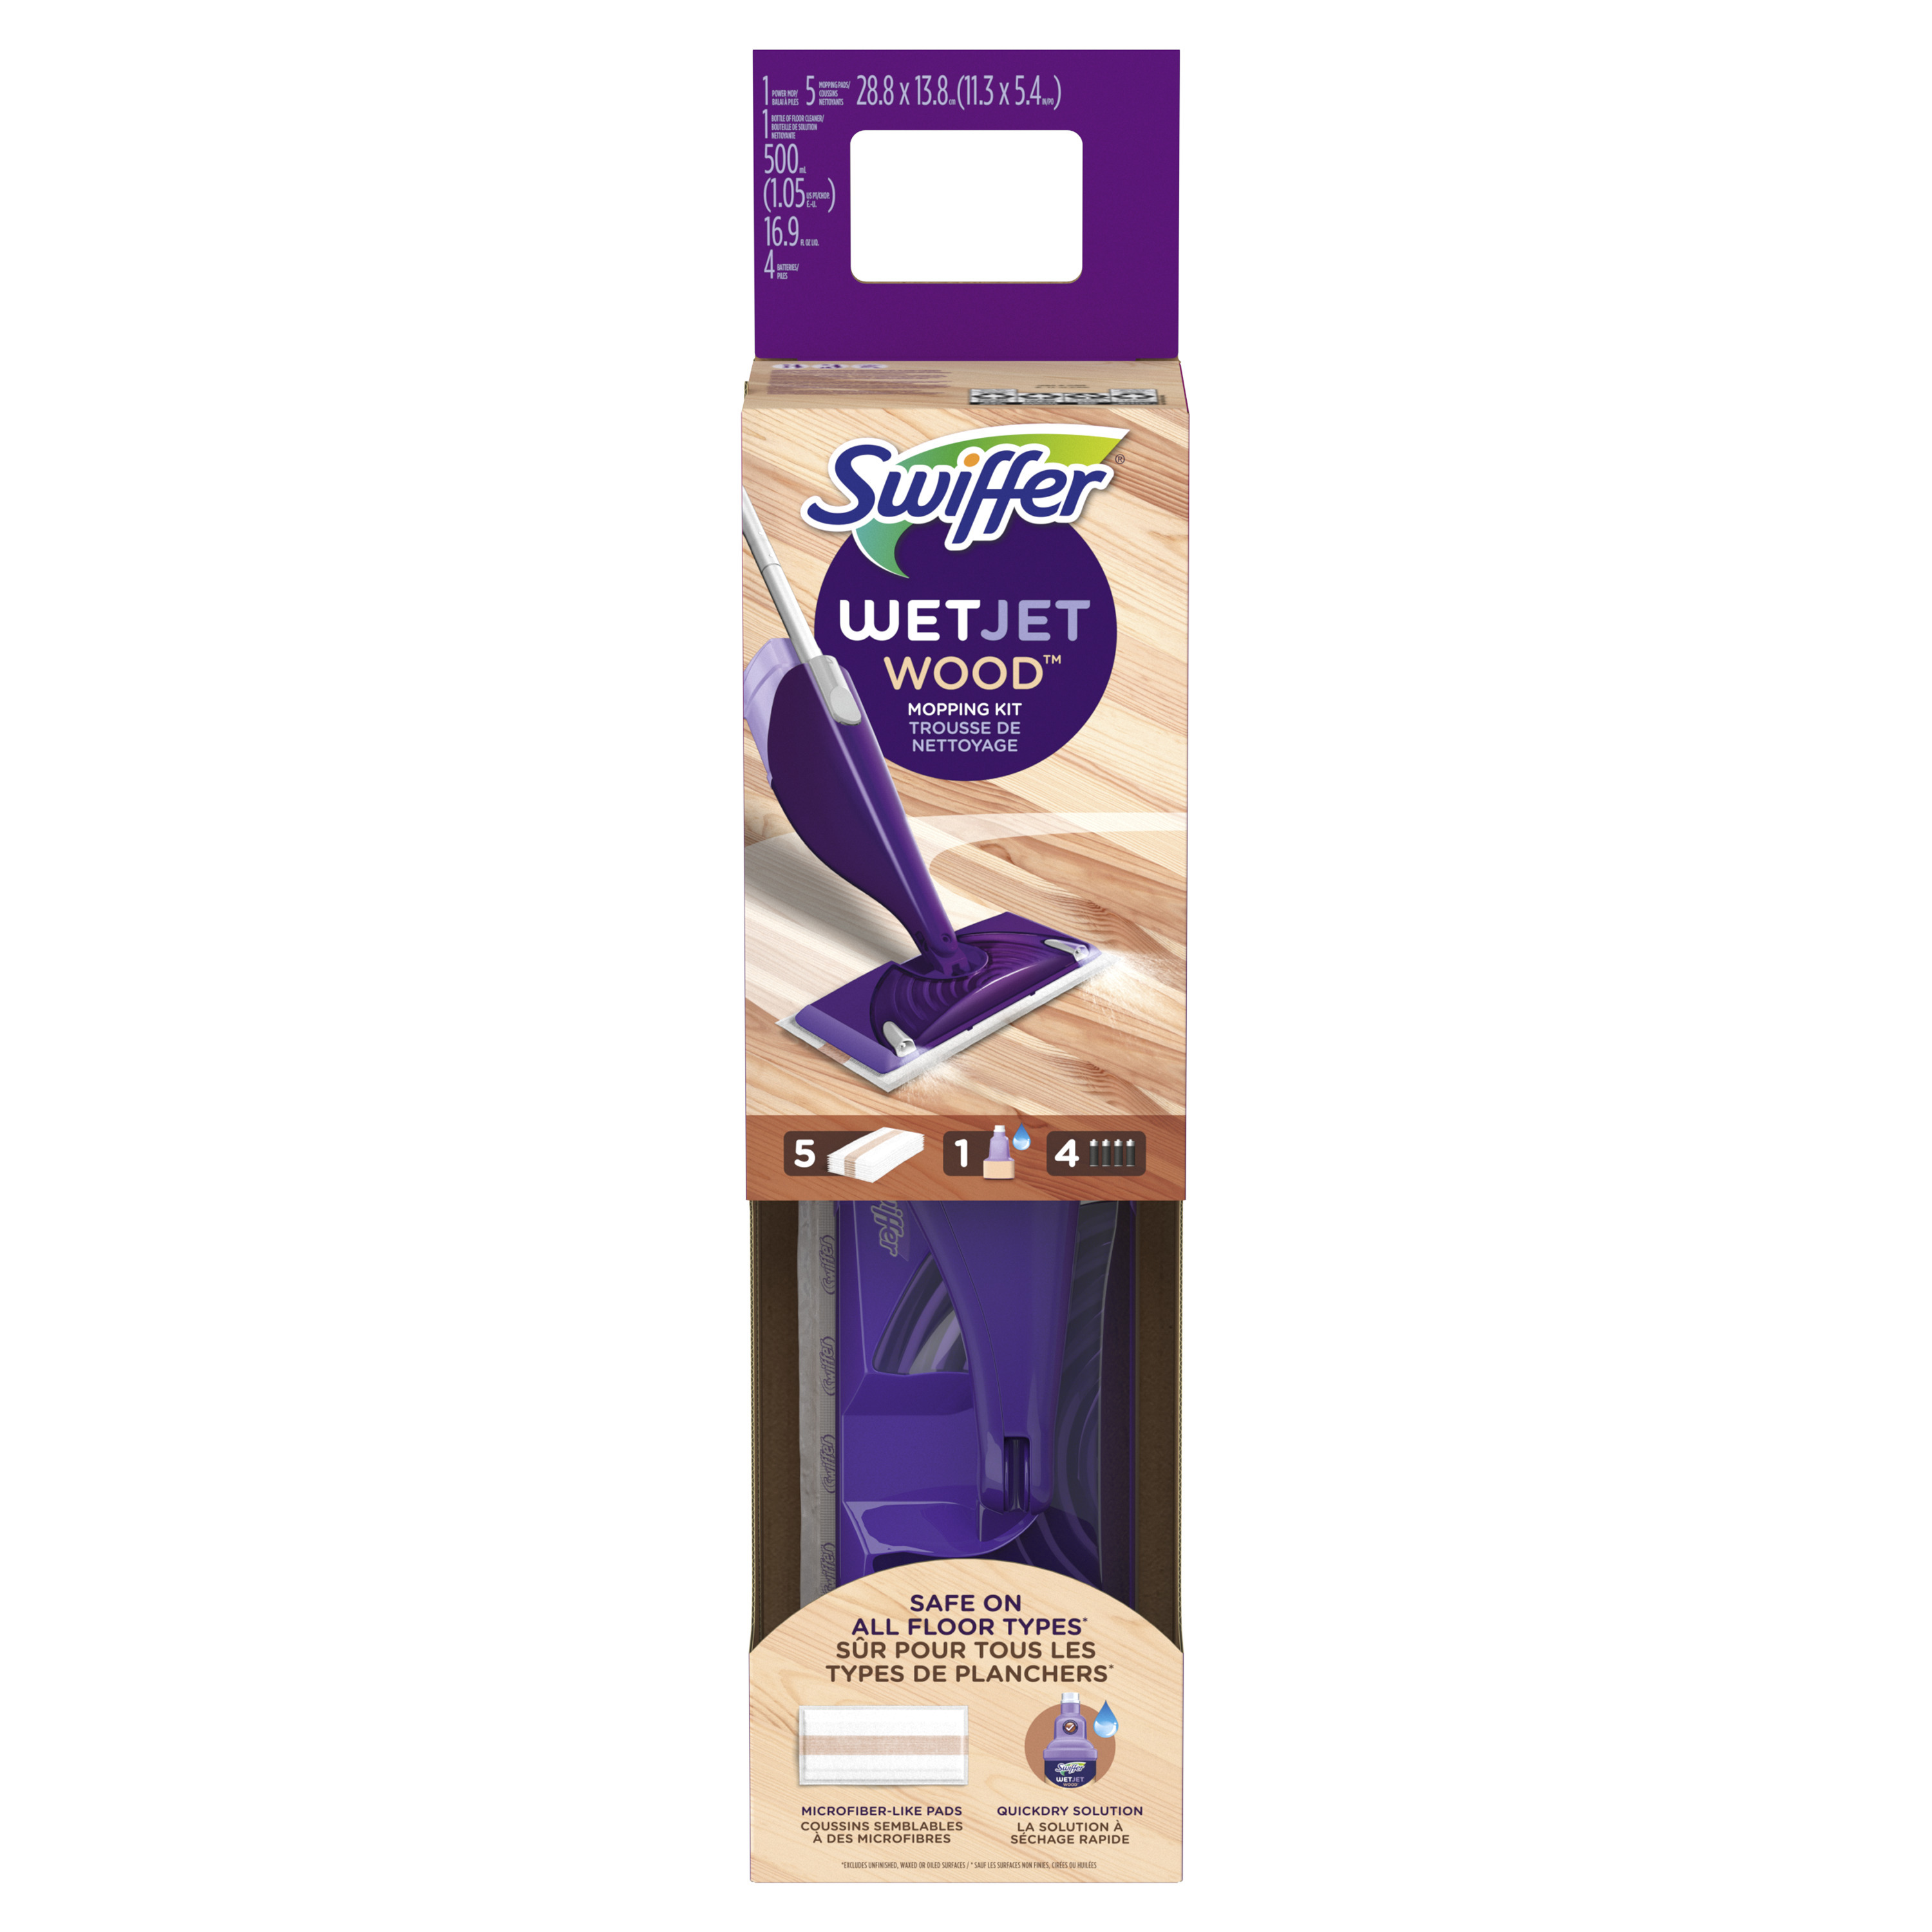 Swiffer WetJet Wood Mop Kit (1 Spray Mop, 5 Mopping Pads, 1 Cleaning Solution) - image 1 of 12